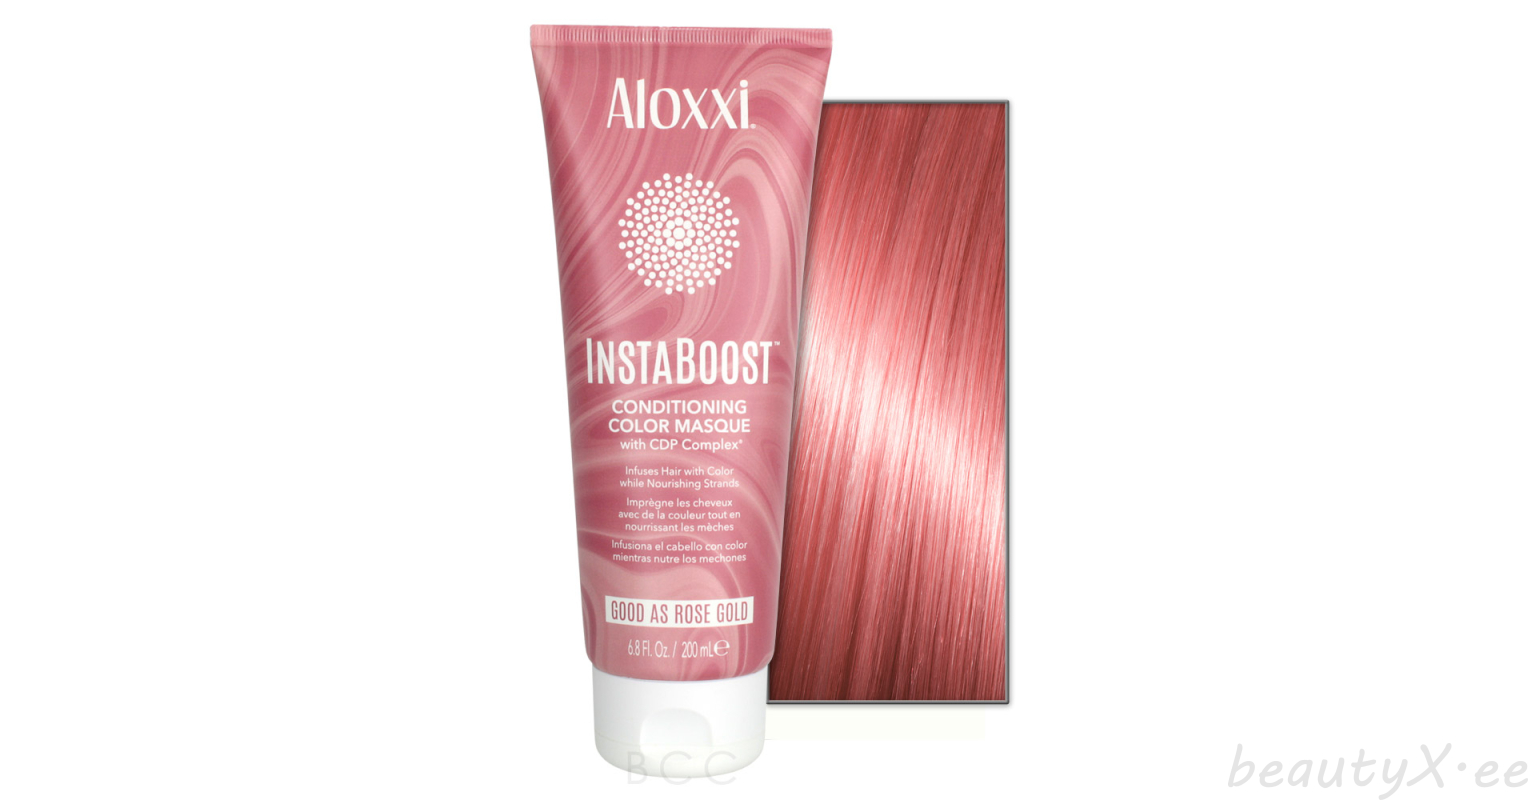 Aloxxi Instaboost Conditioning Color Masque Good As Rose Gold 0ml Beautyx Ee